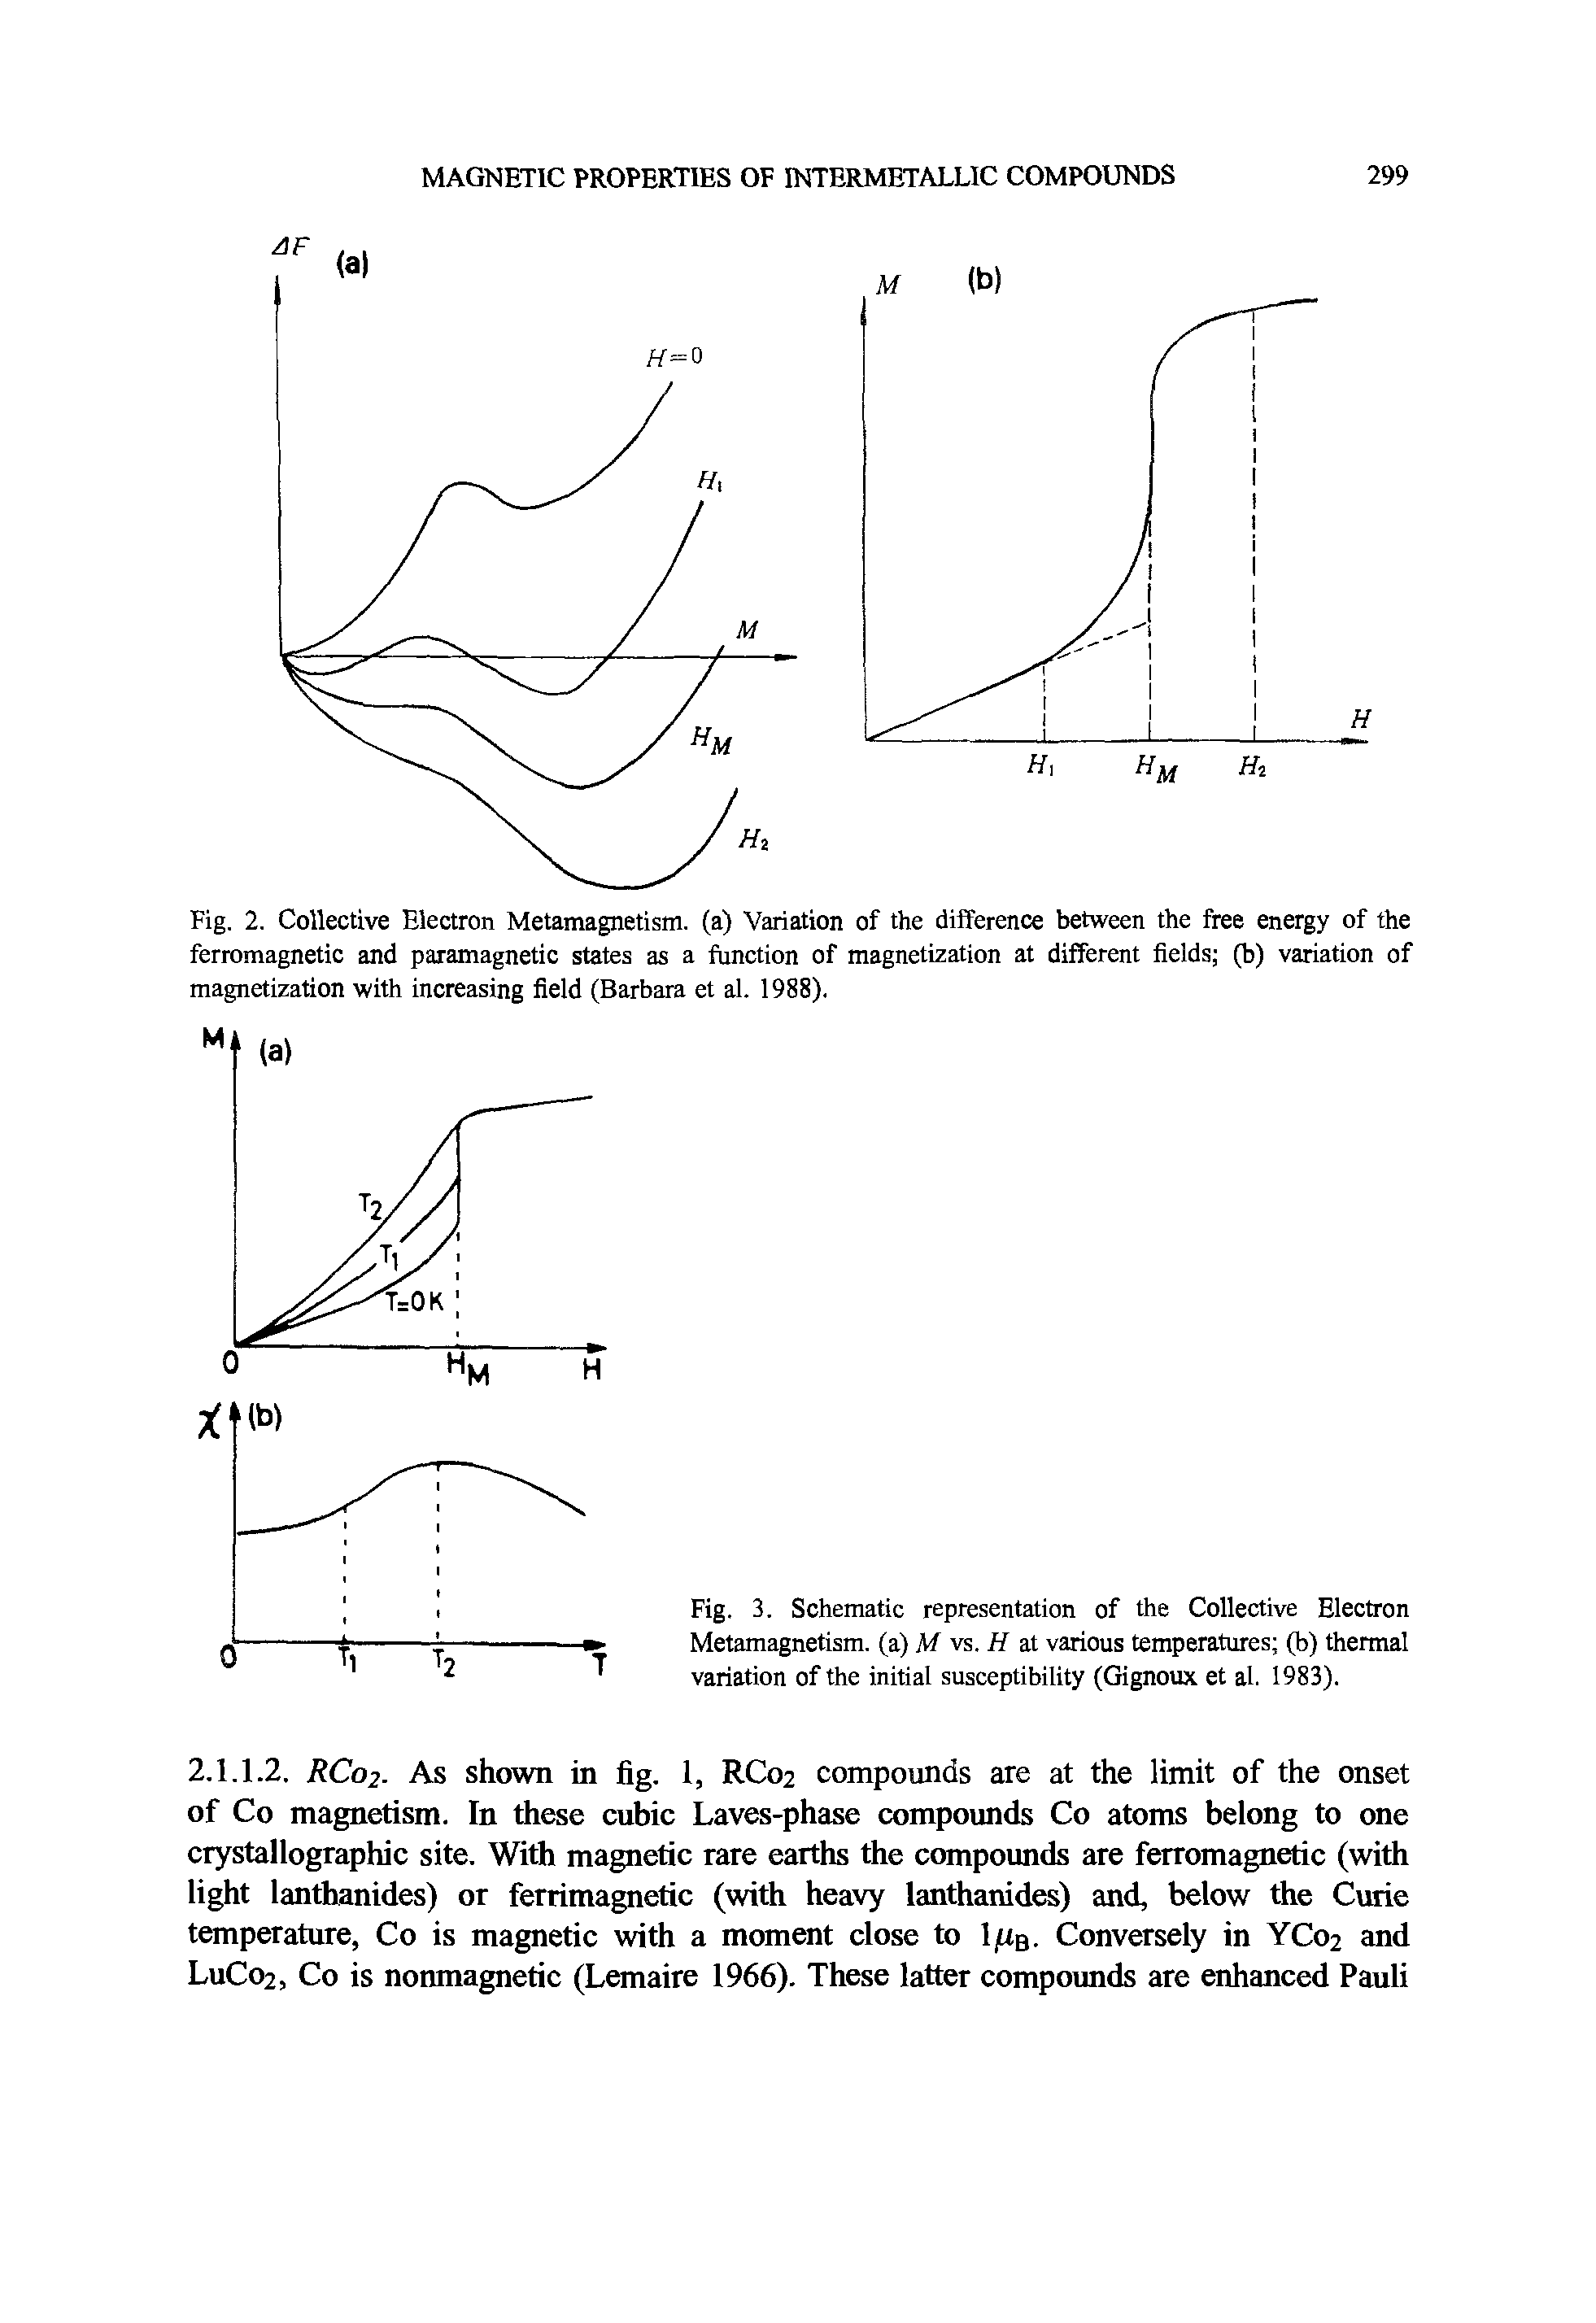 Fig. 2. Collective Electron Metamagnetism, (a) Variation of the difference between the ftee energy of the ferromagnetic and paramagnetic states as a function of magnetization at different fields (b) variation of magnetization with increasing field (Barbara et al. 1988).